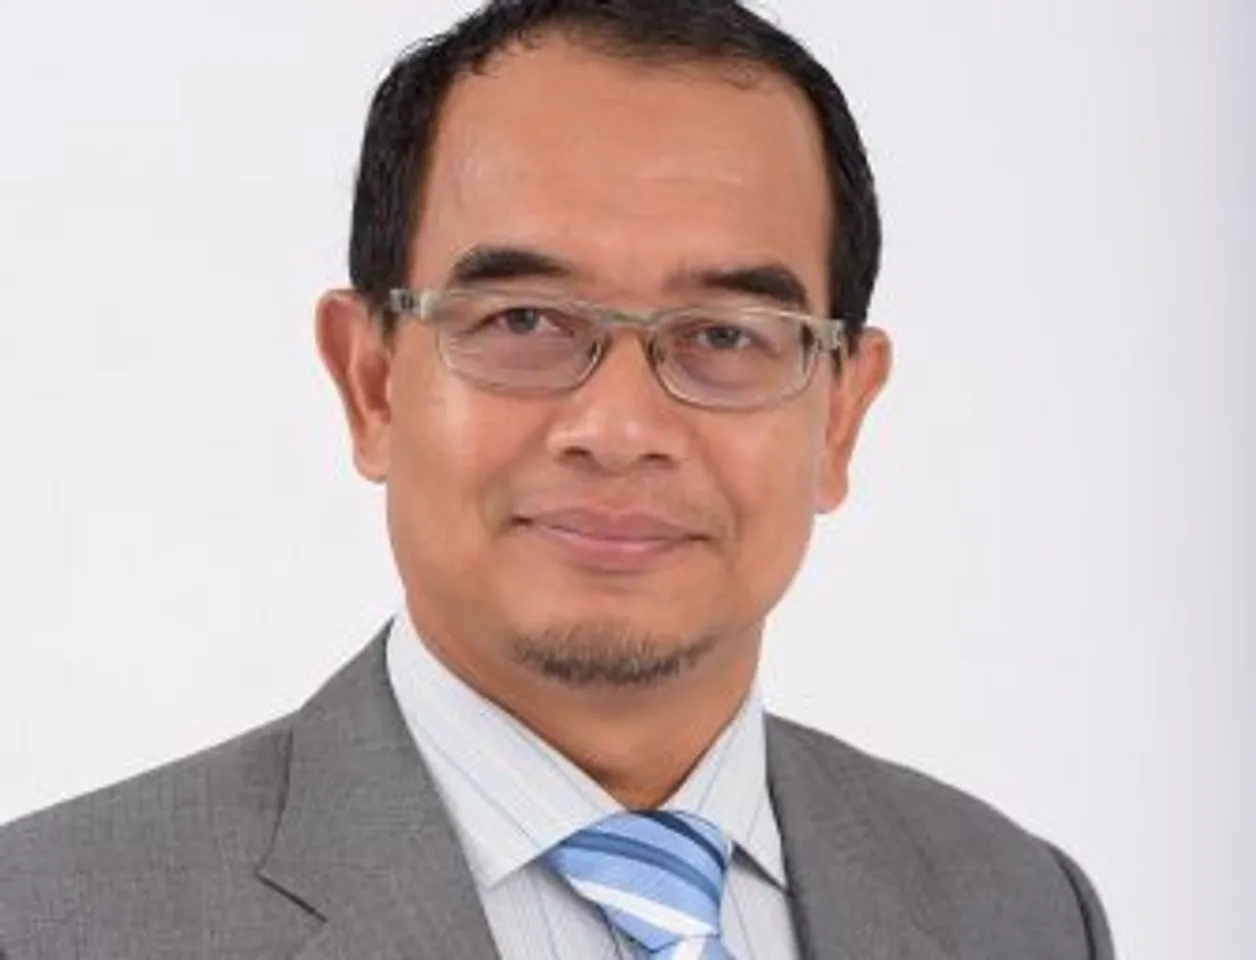 Brocade names Abdul Aziz Ali as country manager for Malaysia